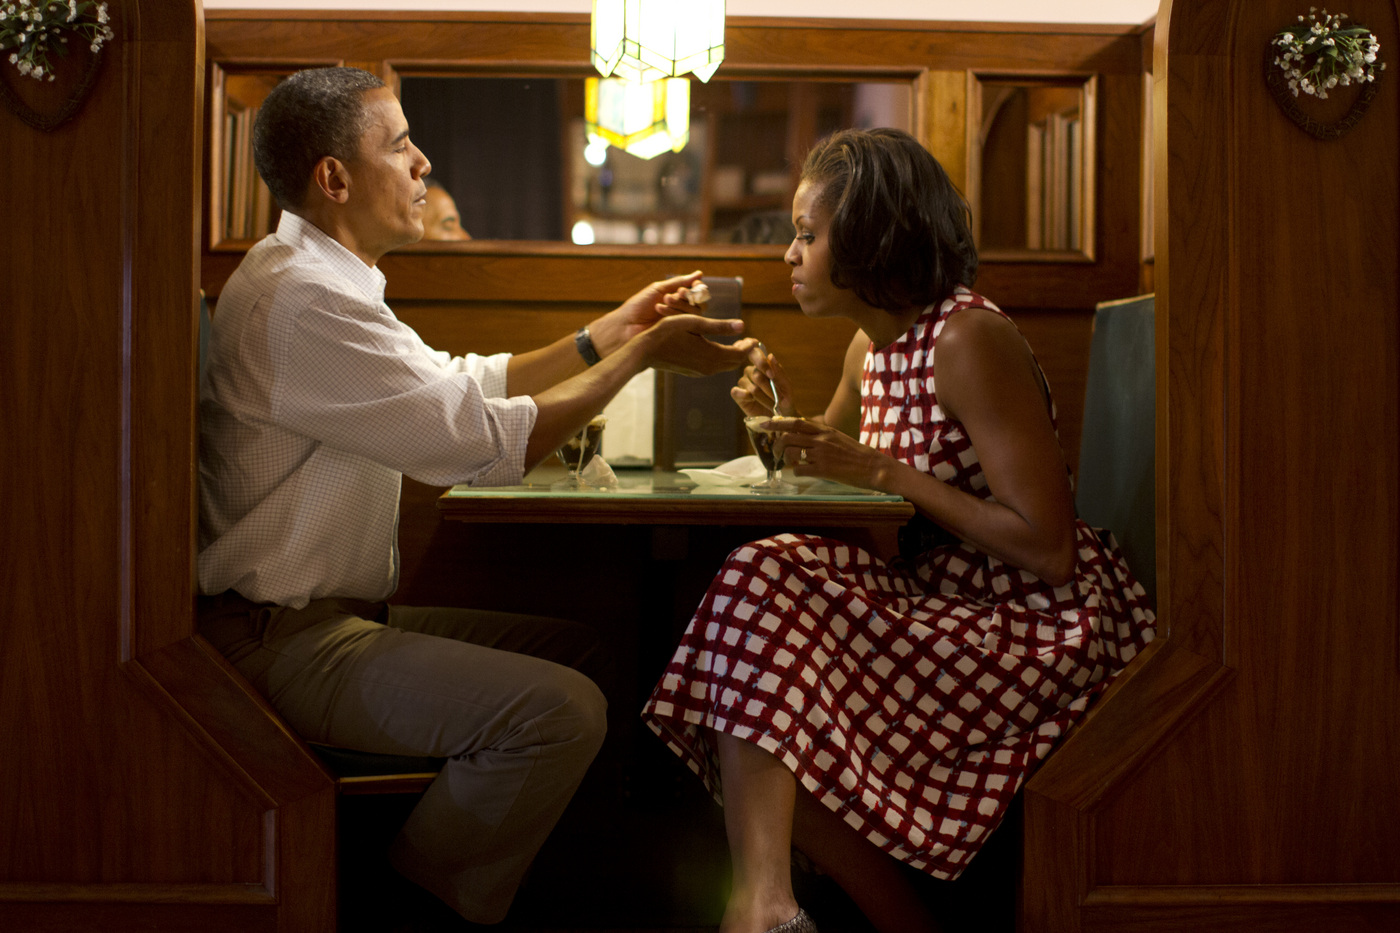 The First Couple shares a First Sundae - Iowa / 2012